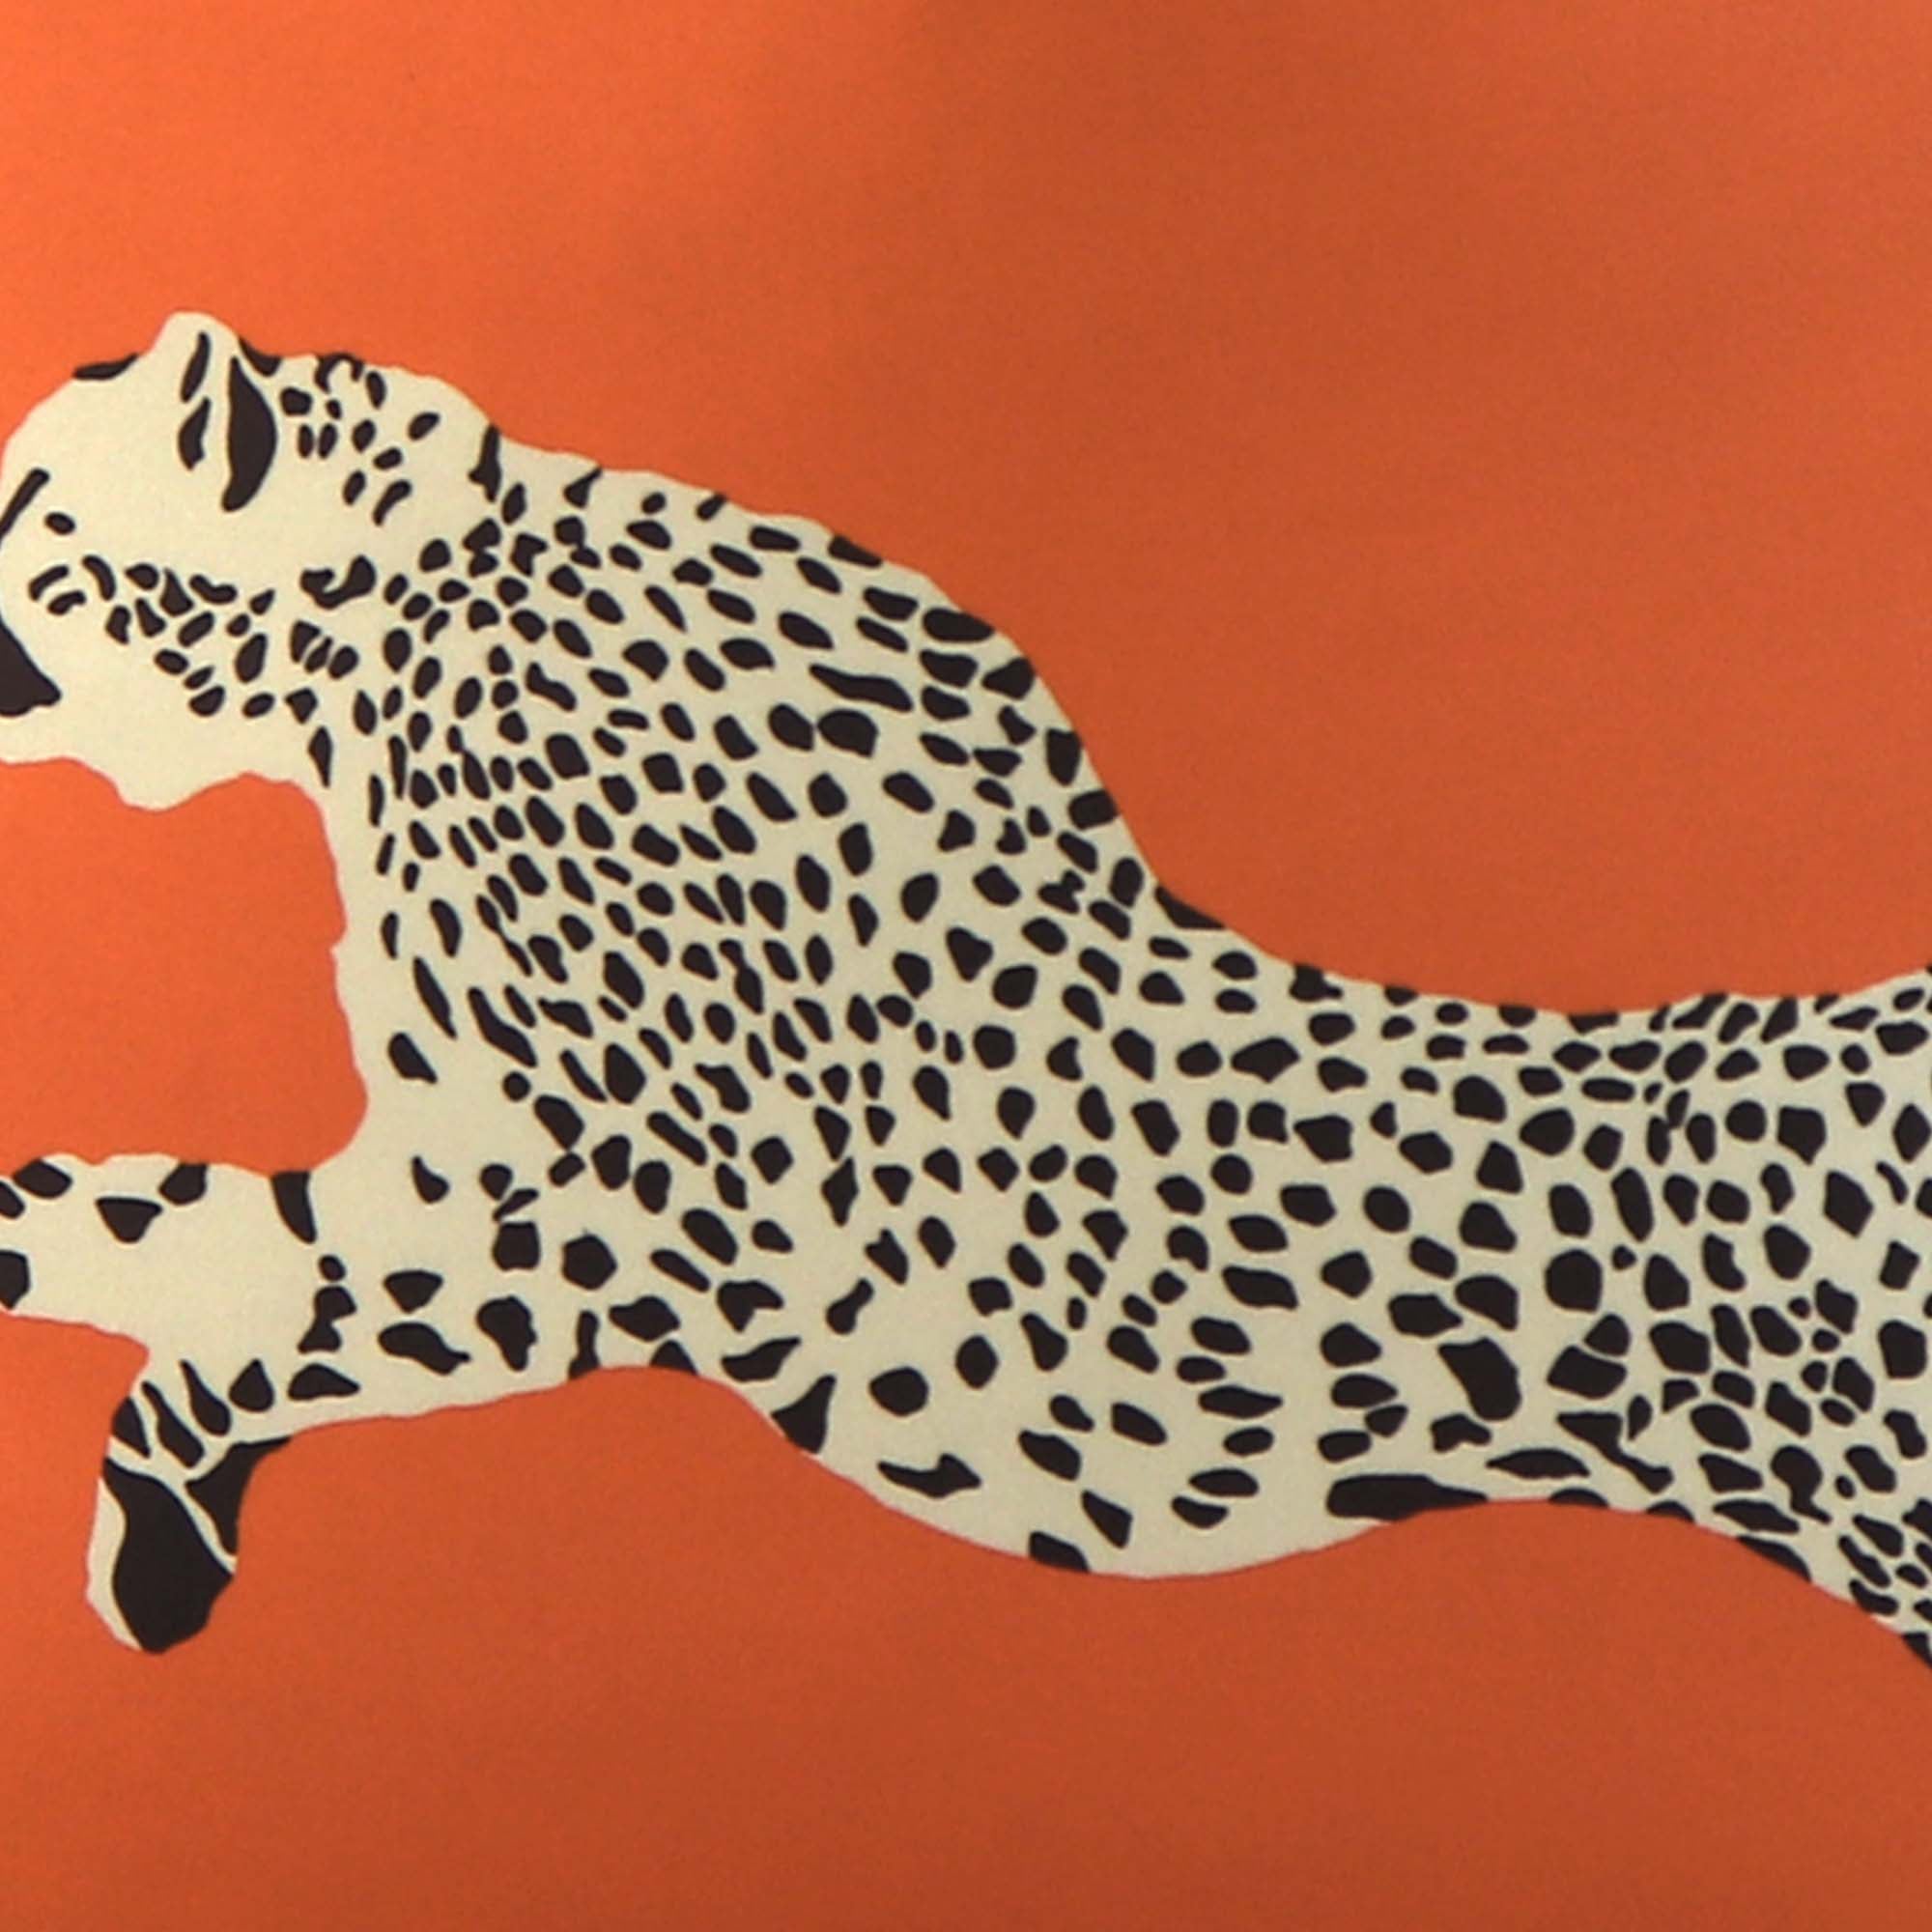 Leaping Cheetah Clementine / 4x4 inch Fabric Swatch - &